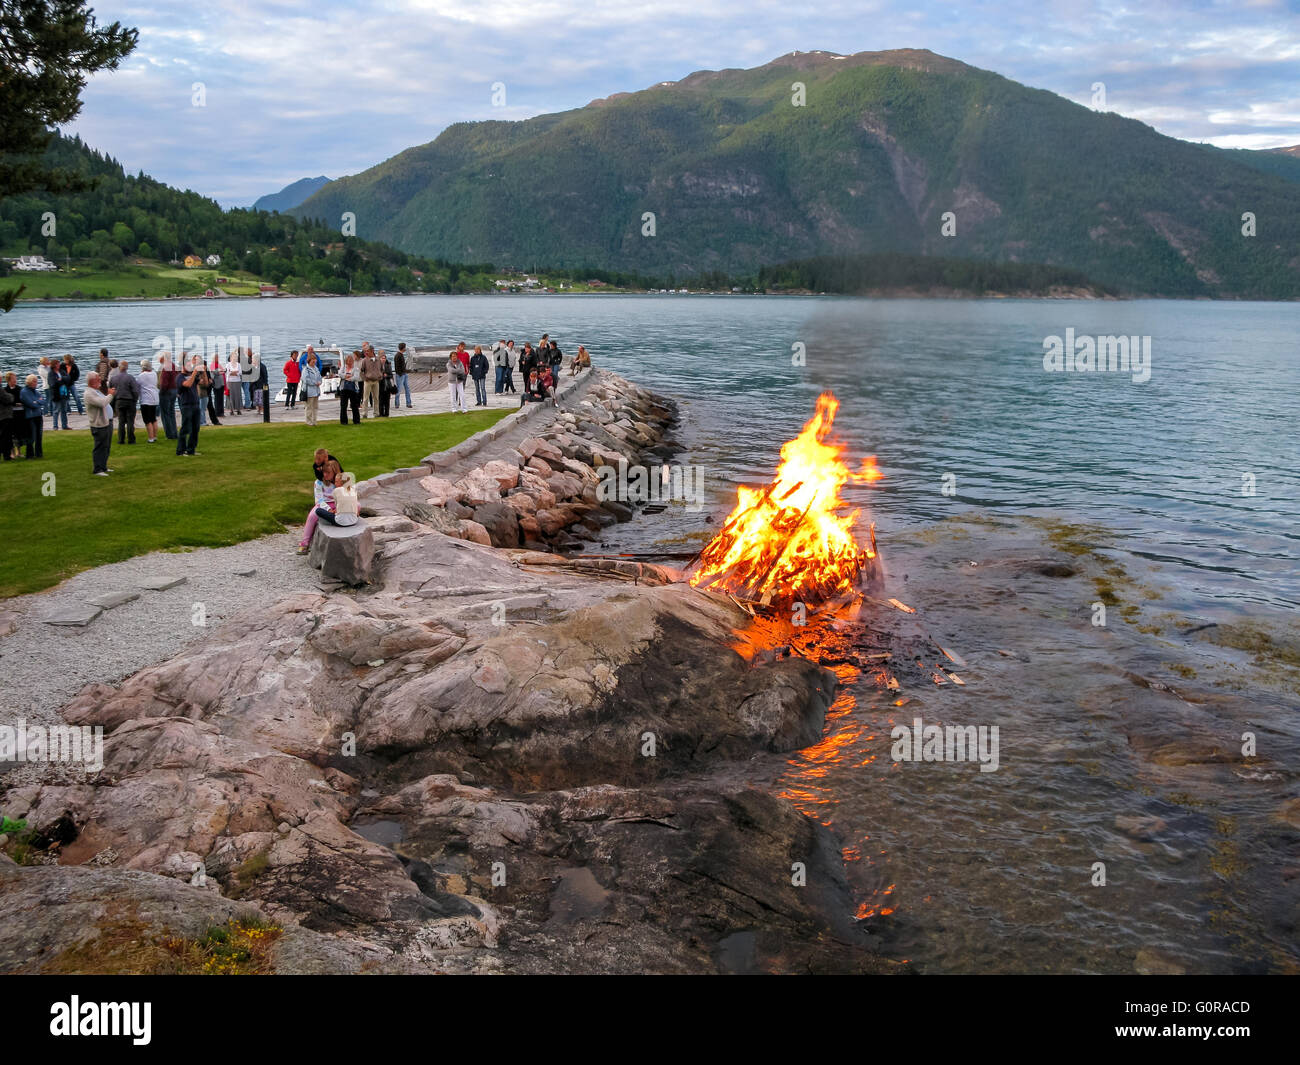 Midsummer's Eve bonfire in Balestrand, Sognefjord, Norway Stock Photo